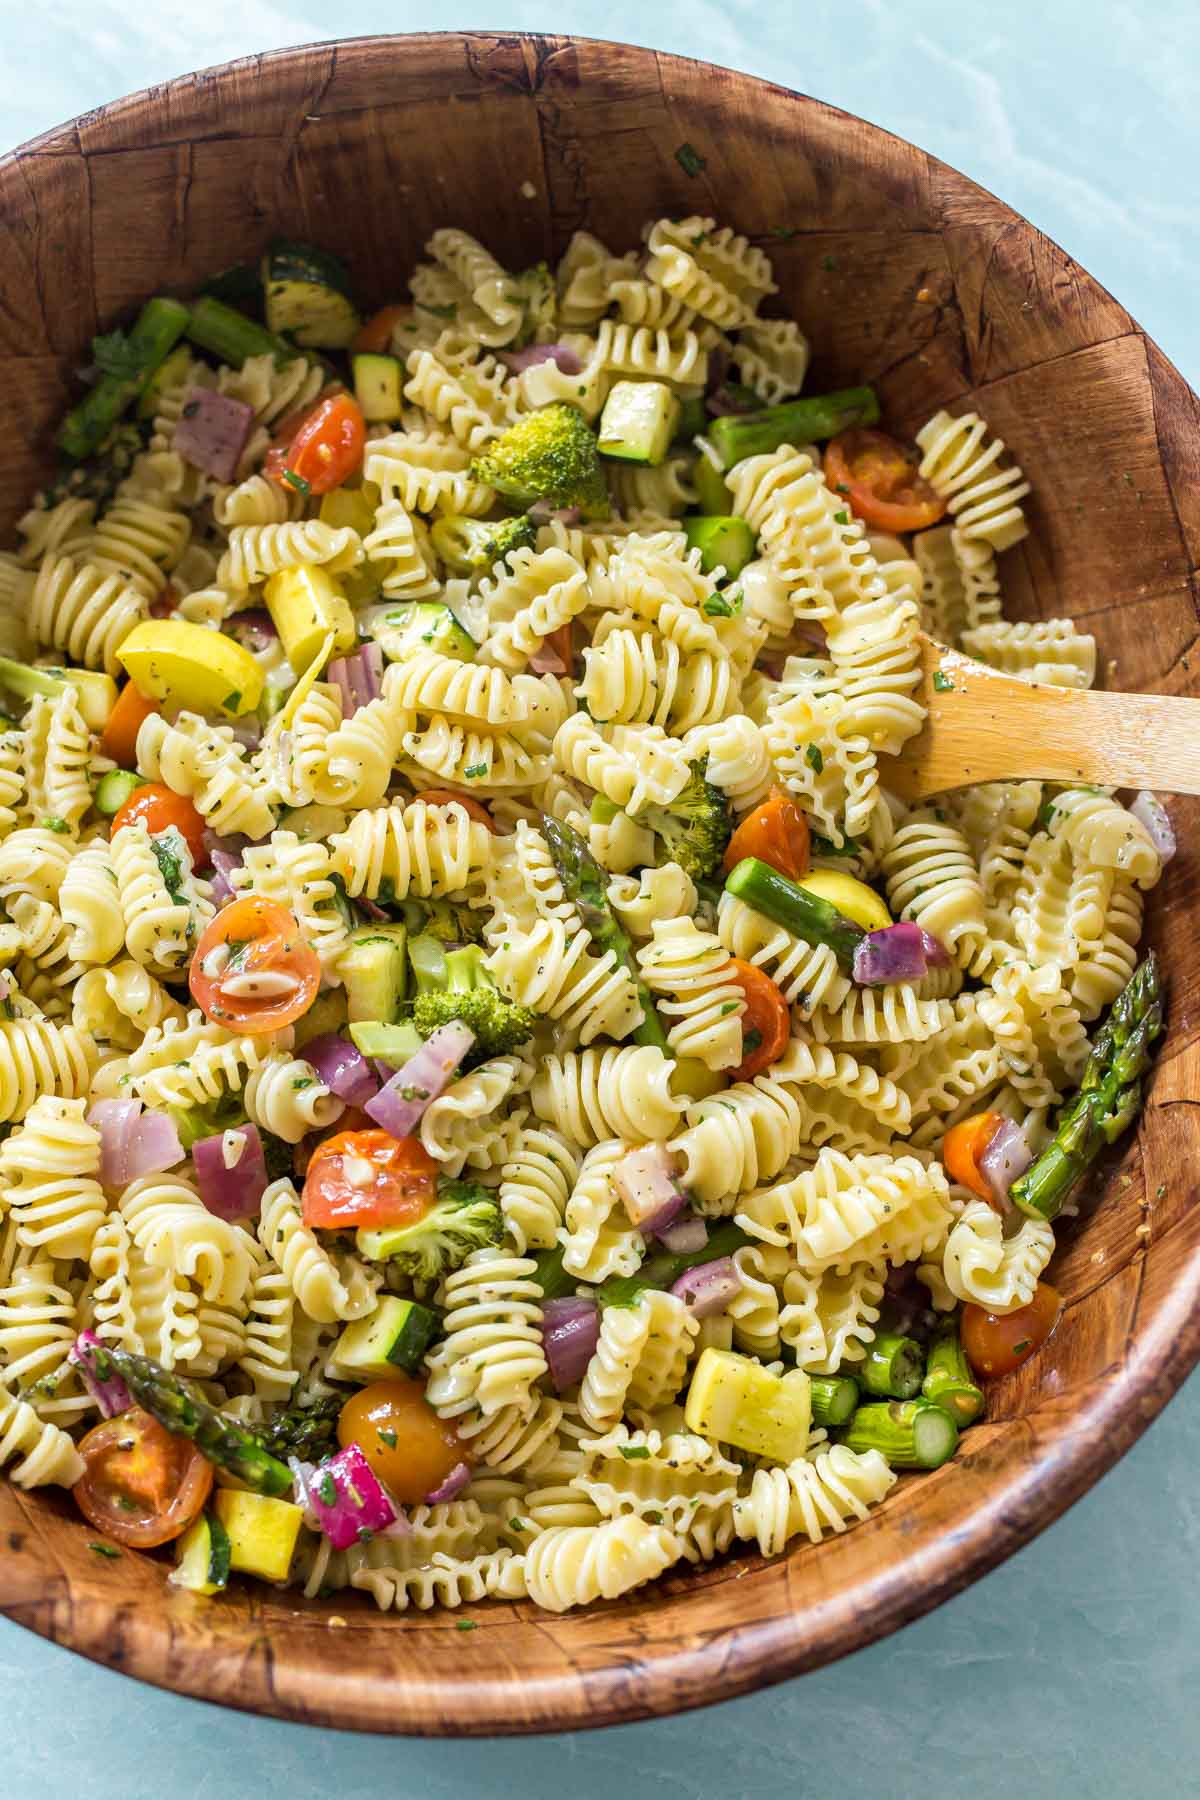 Roasted vegetables and cooked pasta being tossed with pasta salad dressing in a large bamboo bowl